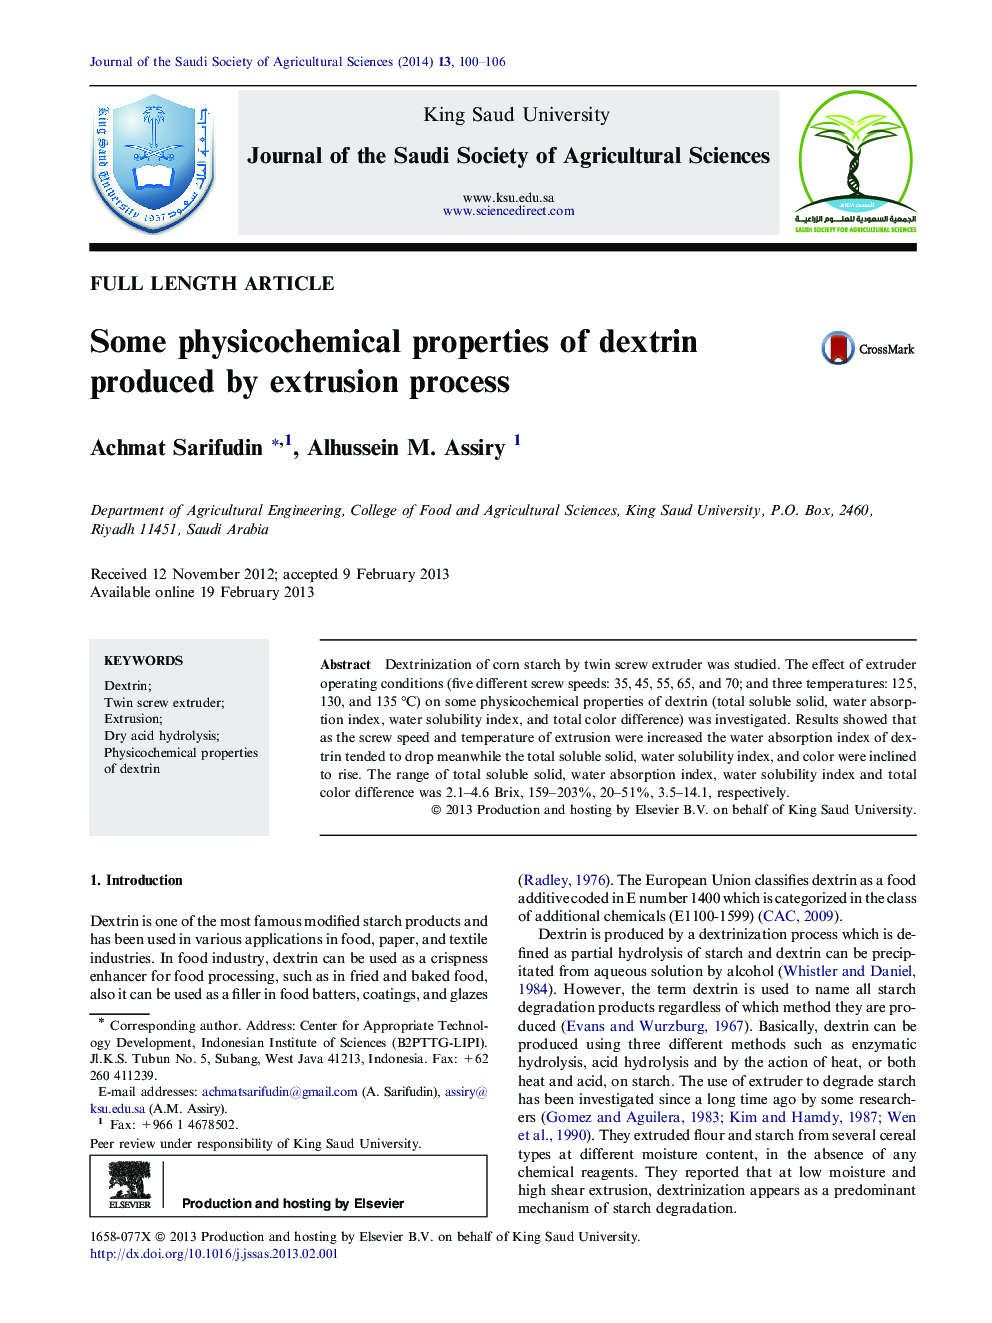 Some physicochemical properties of dextrin produced by extrusion process 